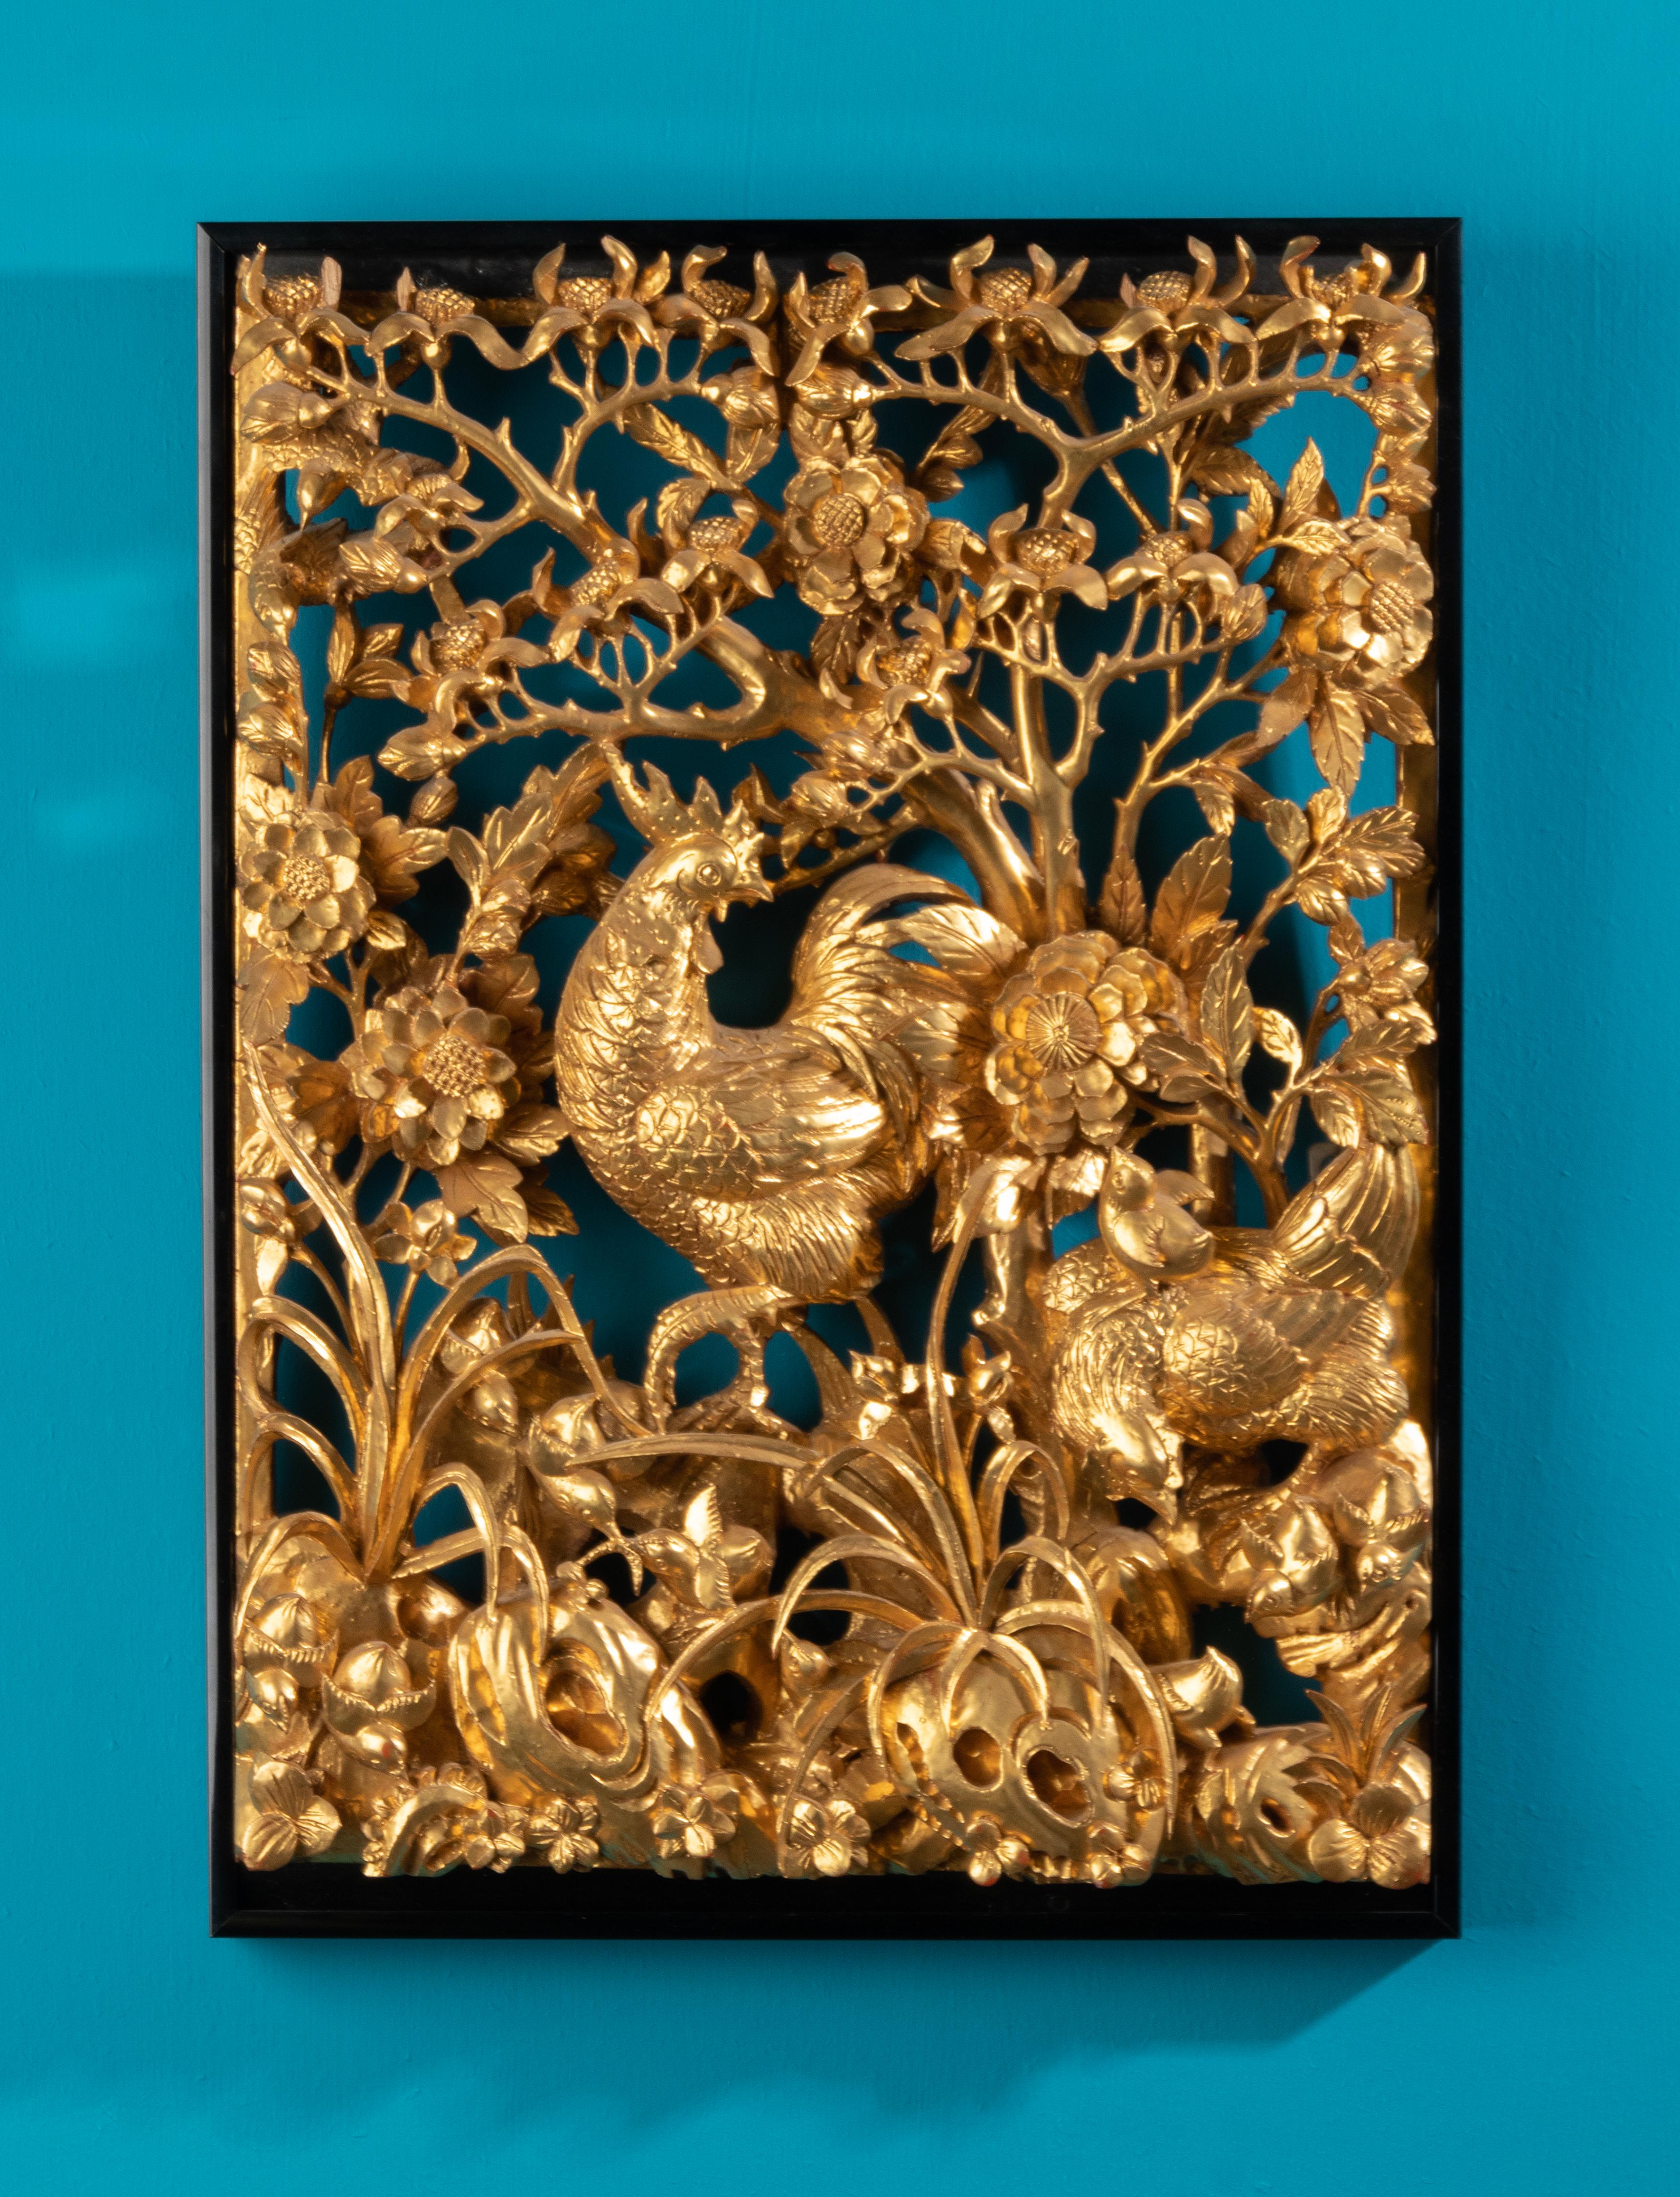 A very detailed Chinese style bas-relief / low relief representing a rooster, chickens and peony flowers and floral surroundings. It is a wall mounted sculpture with a shallow overall depth. This rectangular bas-relief is hand carved in wood and